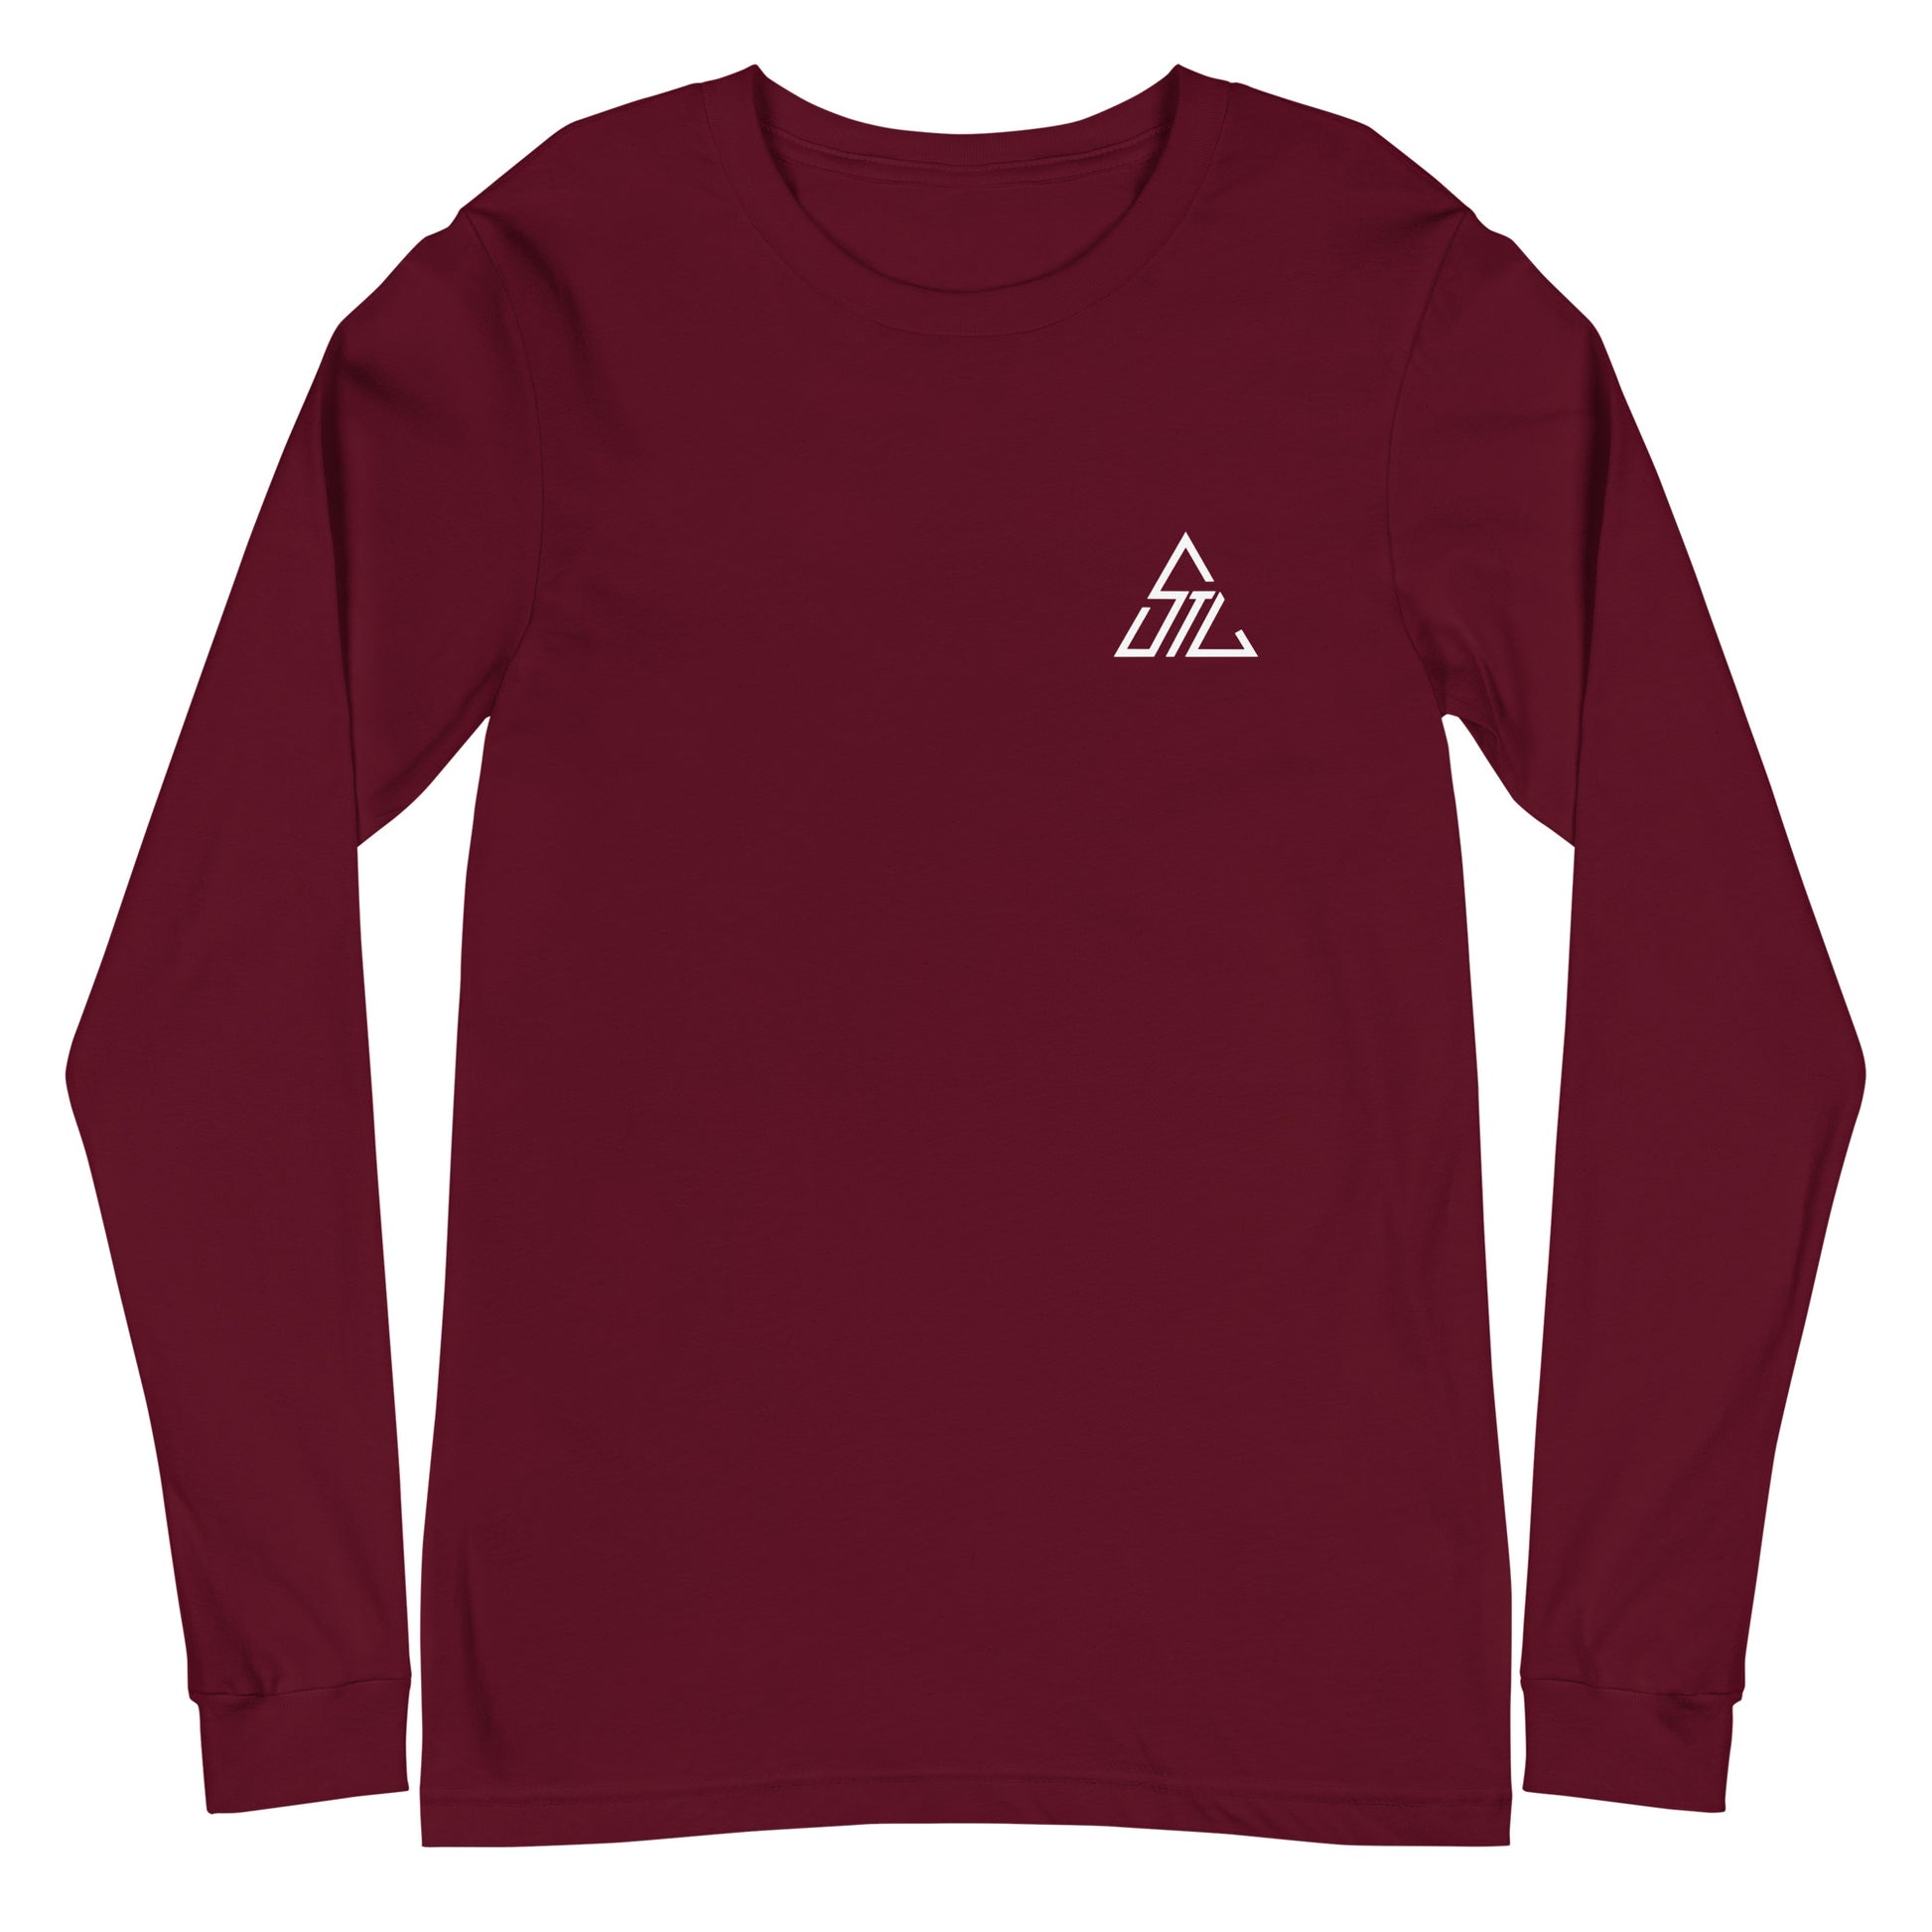 Two More Skip The Last "Bluebird" maroon unisex Long sleeve t-shirt. Front view